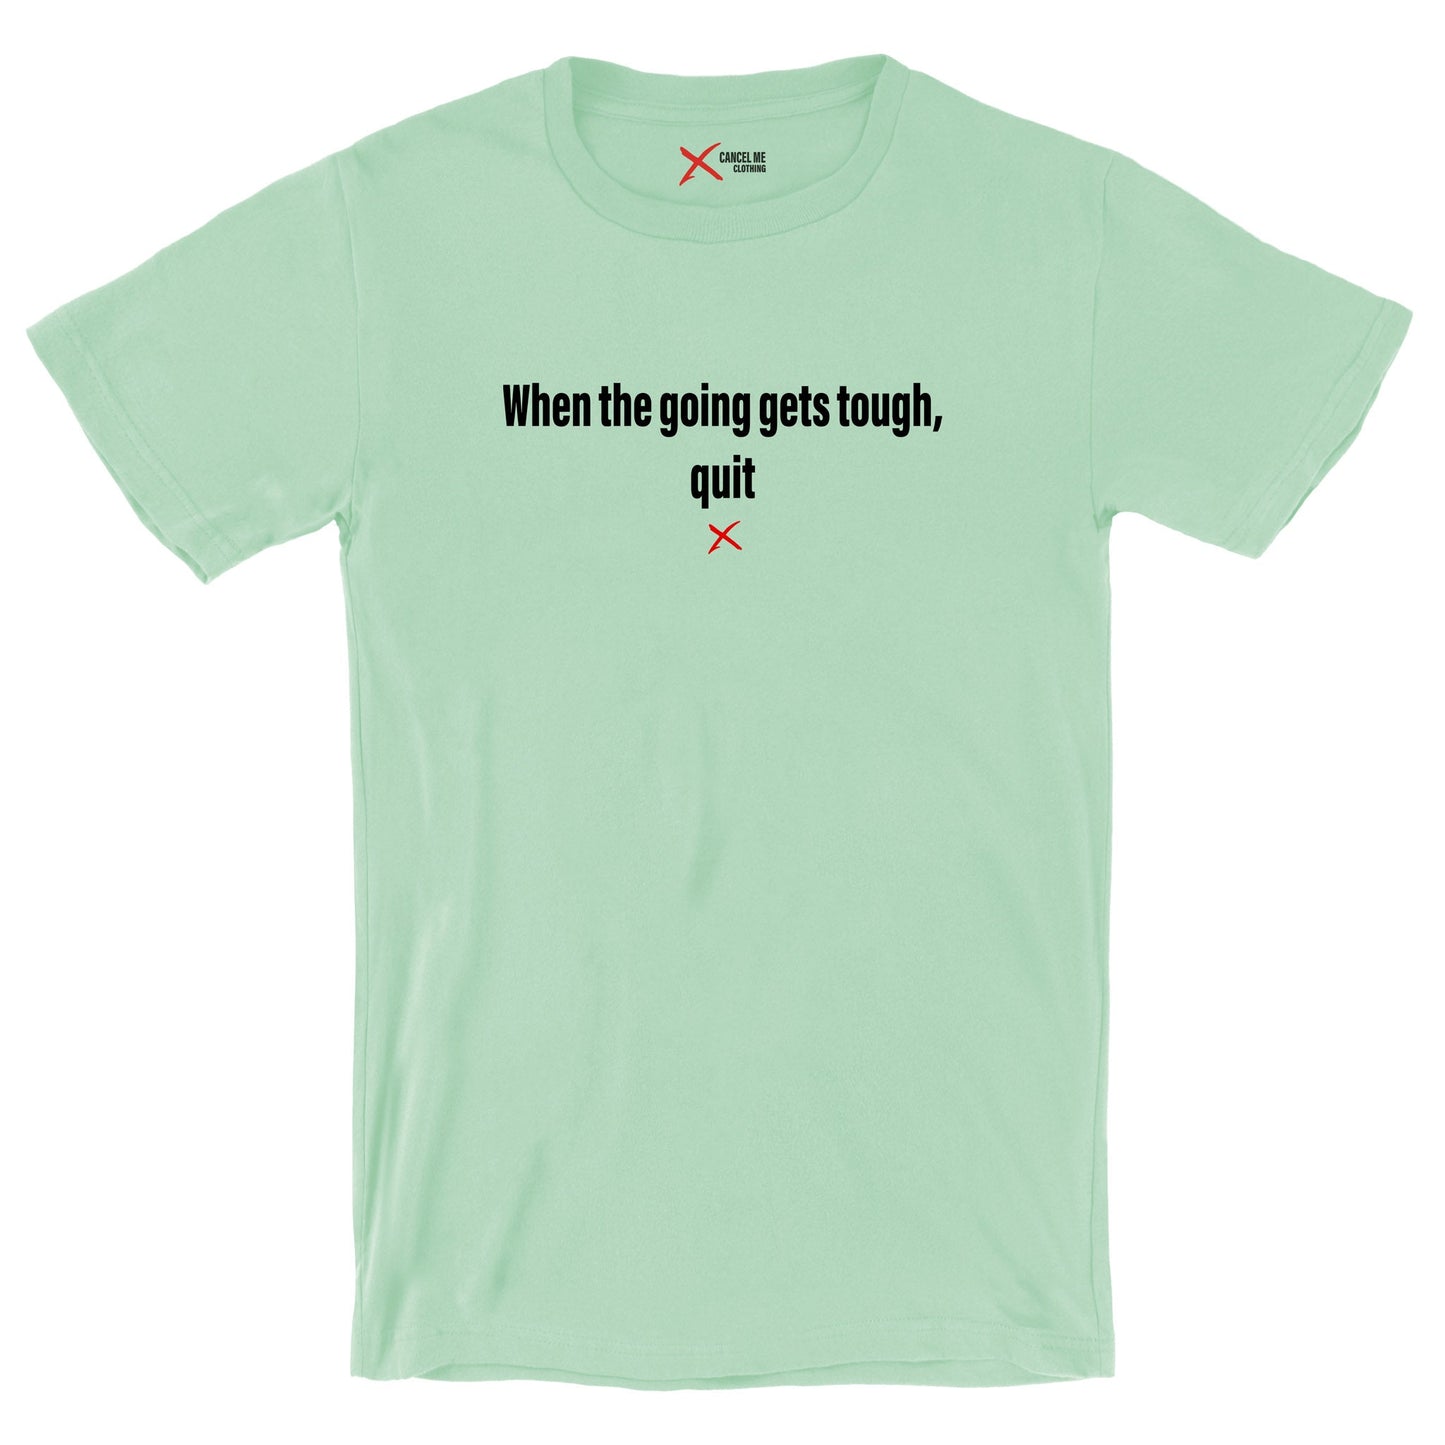 When the going gets tough, quit - Shirt